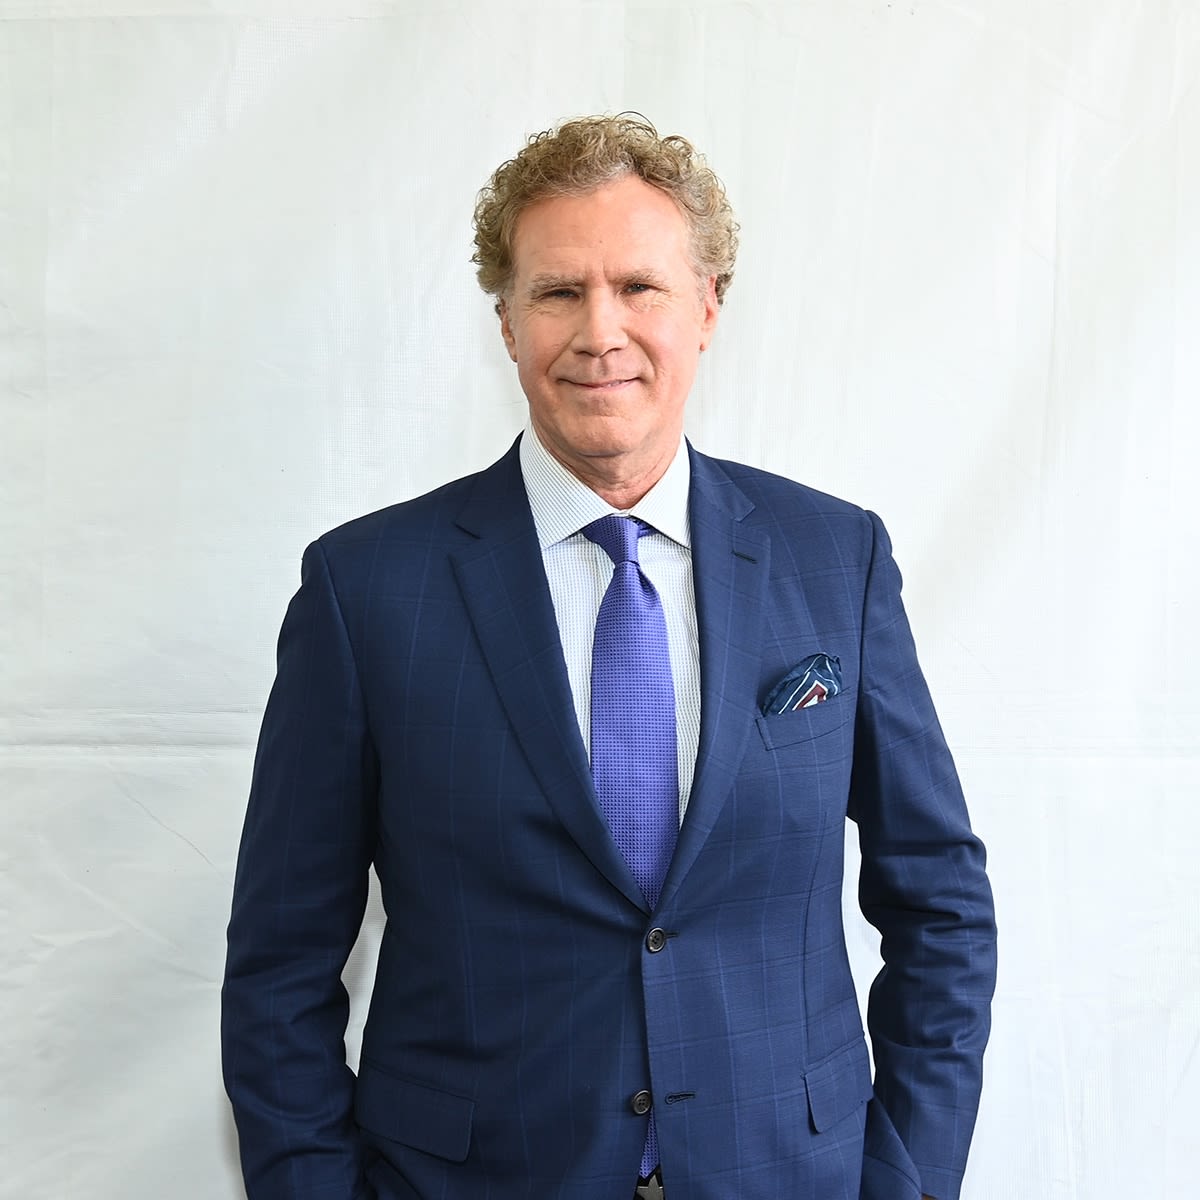 Will Ferrell Reveals Why His Real Name “Embarrassed” Him Growing Up